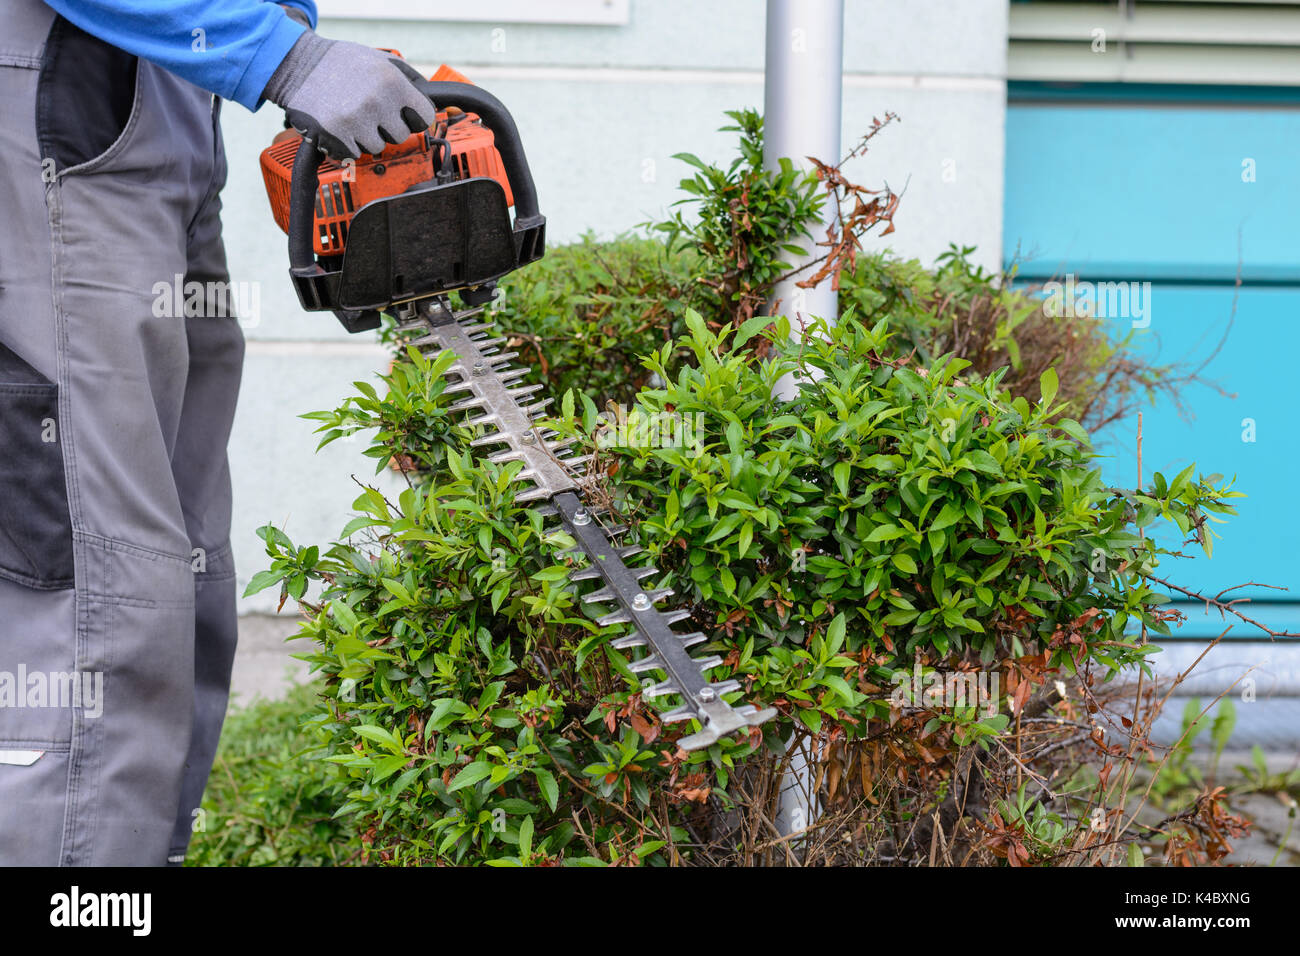 Landscape Keeper Cuts Hedge In Work Clothes With A Hedge Trimmer Stock Photo